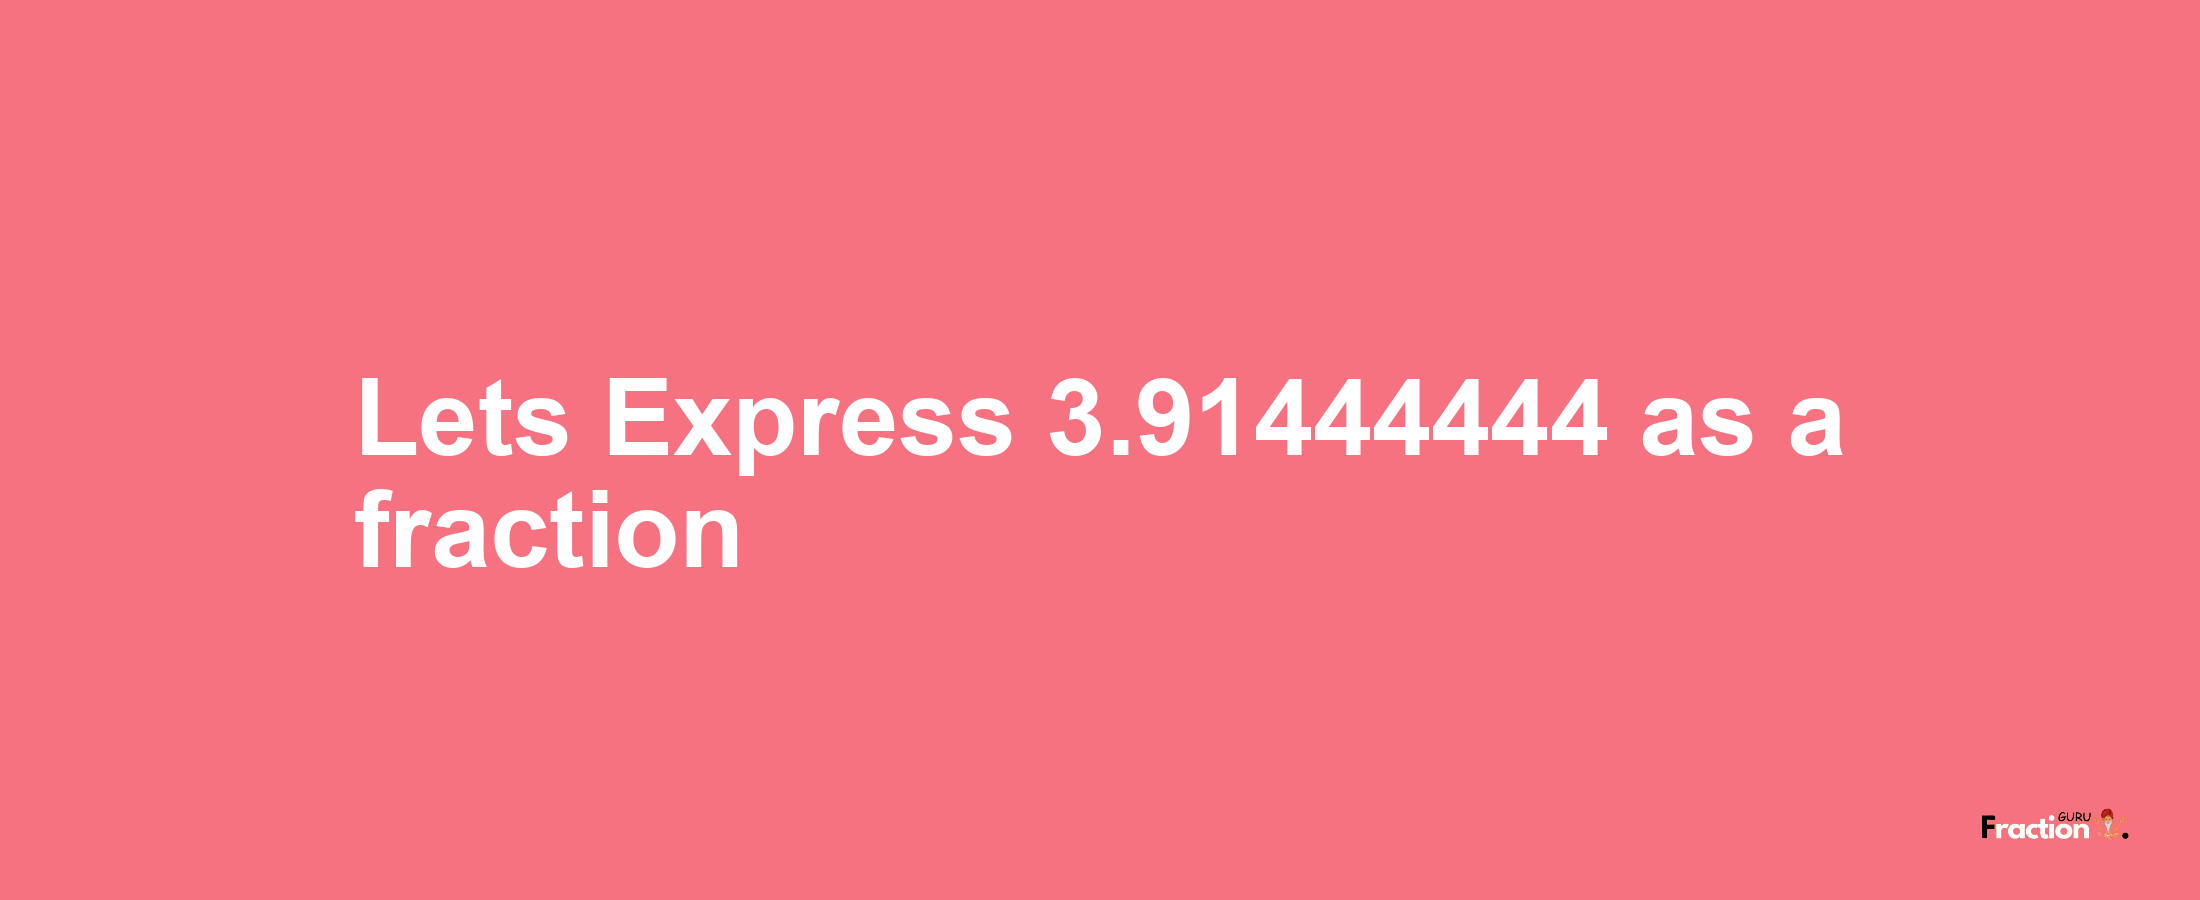 Lets Express 3.91444444 as afraction